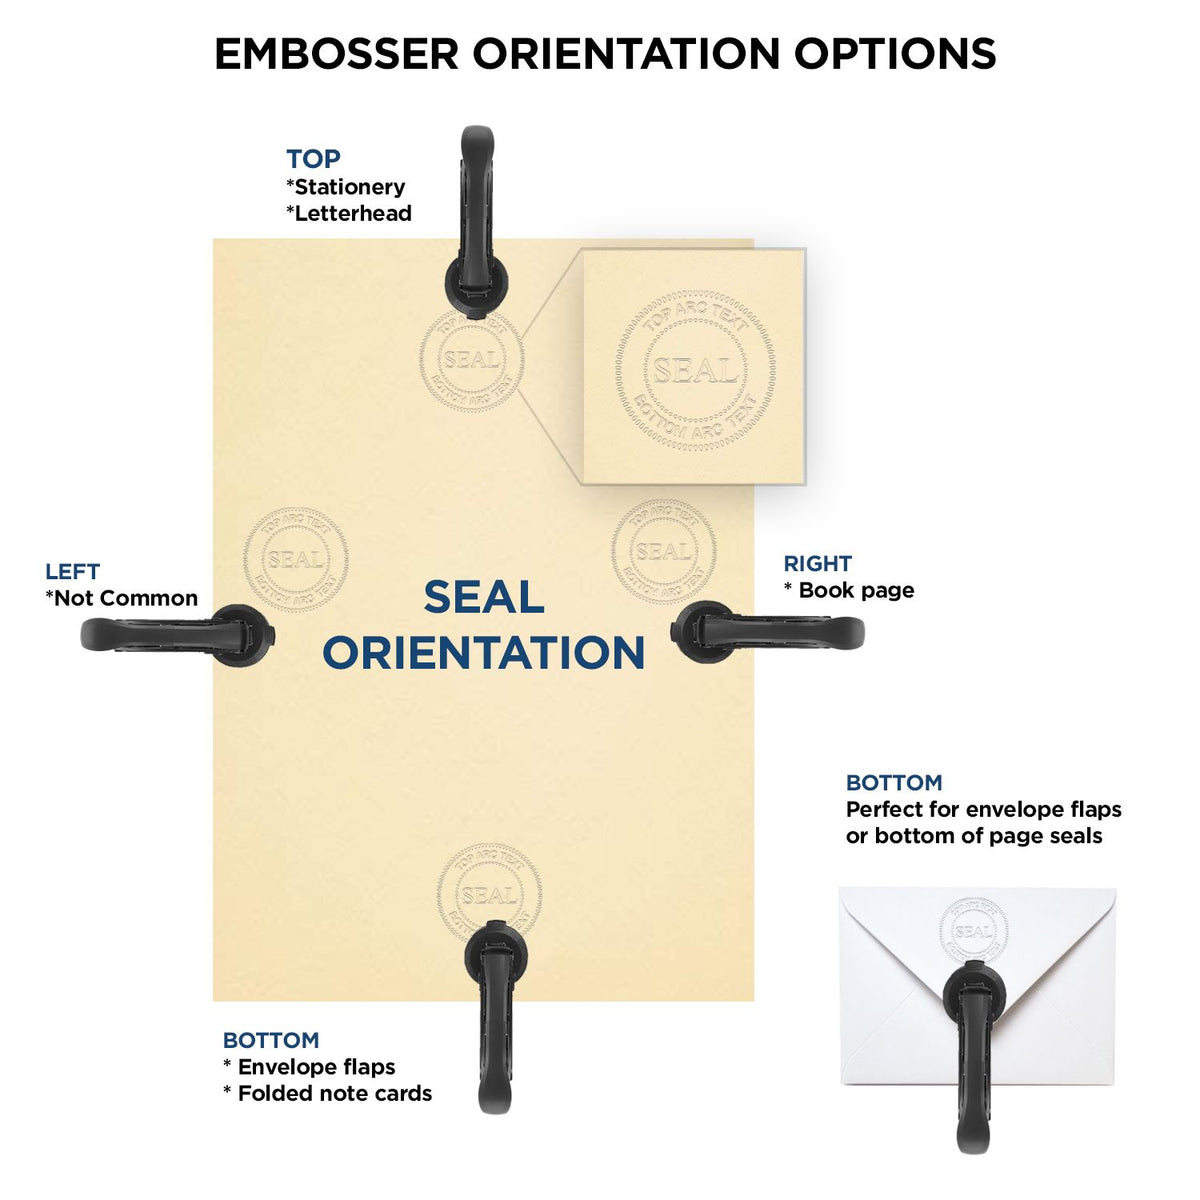 An infographic for the Massachusetts Geologist Desk Seal showing embosser orientation, this is showing examples of a top, bottom, right and left insert.